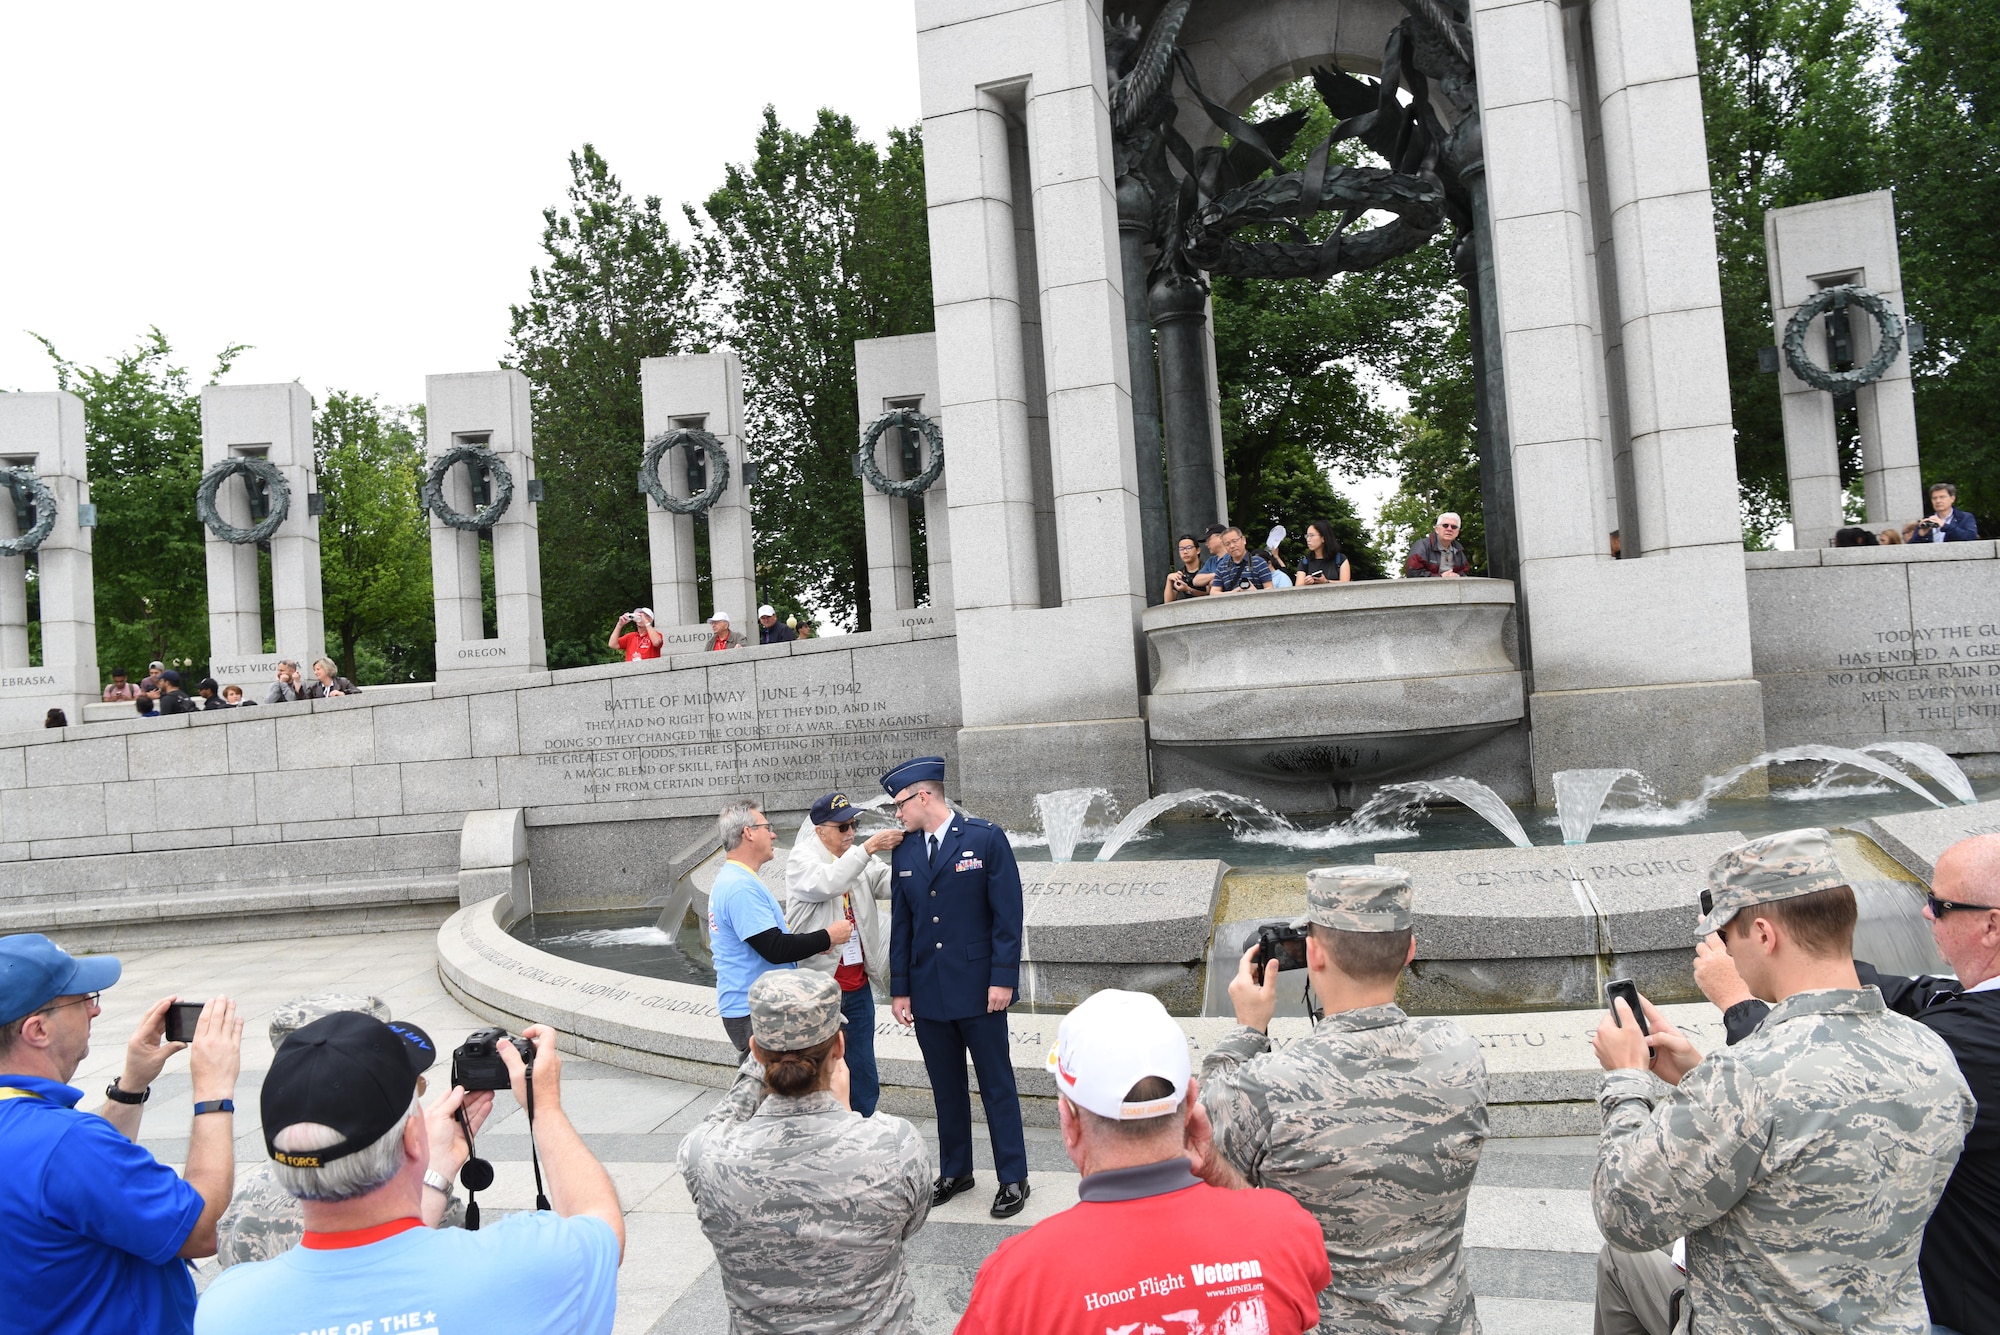 First Lt. Nicholas Lundin, 480th Intelligence, Reconnaissance and Surveillance Wing chief of current operations, has his ranks pinned on by his dad Michael Lundin and grandfather Ray Lundin during his promotion ceremony May 24, 2017 at the World War II memorial in Washington D.C. A crowd of veterans and guardians watched the ceremony and came up afterward to congratulation the new captain. (U.S. Air Force photo by Tech. Sgt. Darnell T. Cannady)